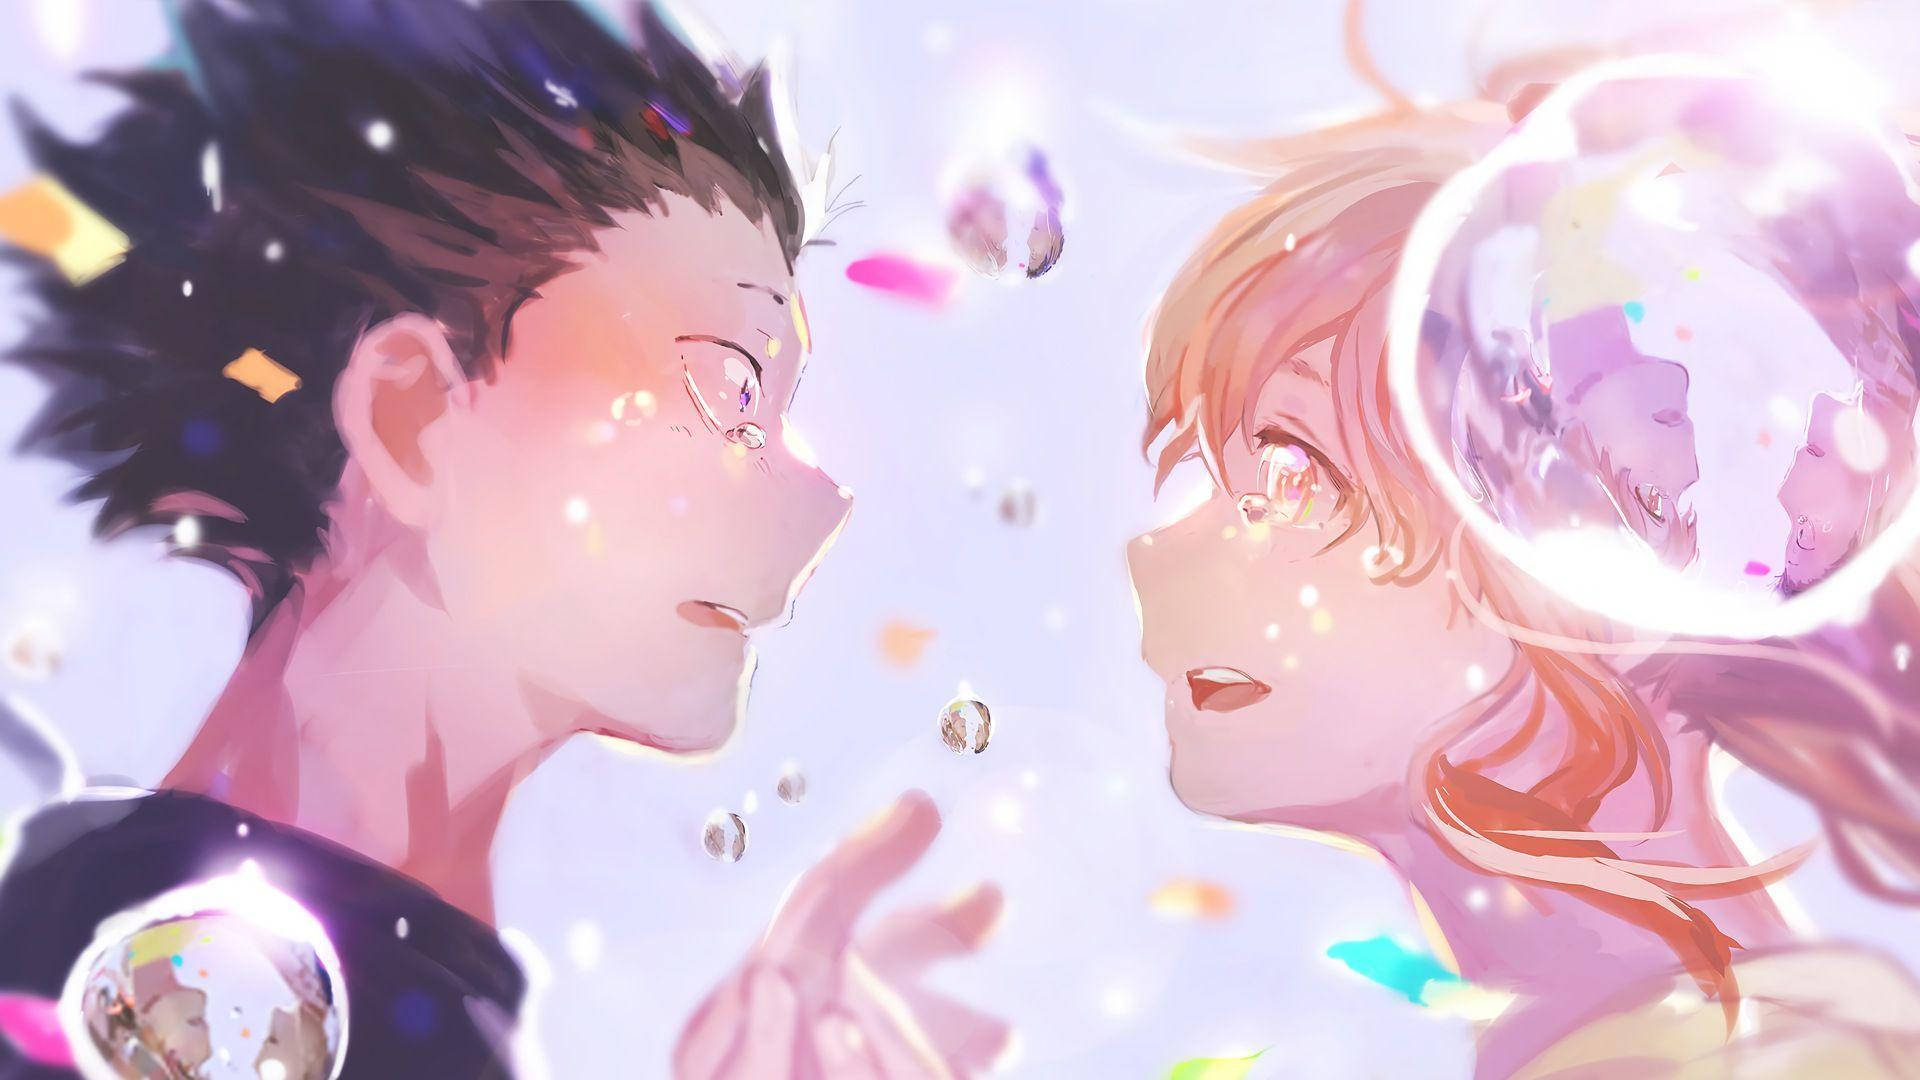 Love and Hope Themes in A Silent Voice Wallpaper